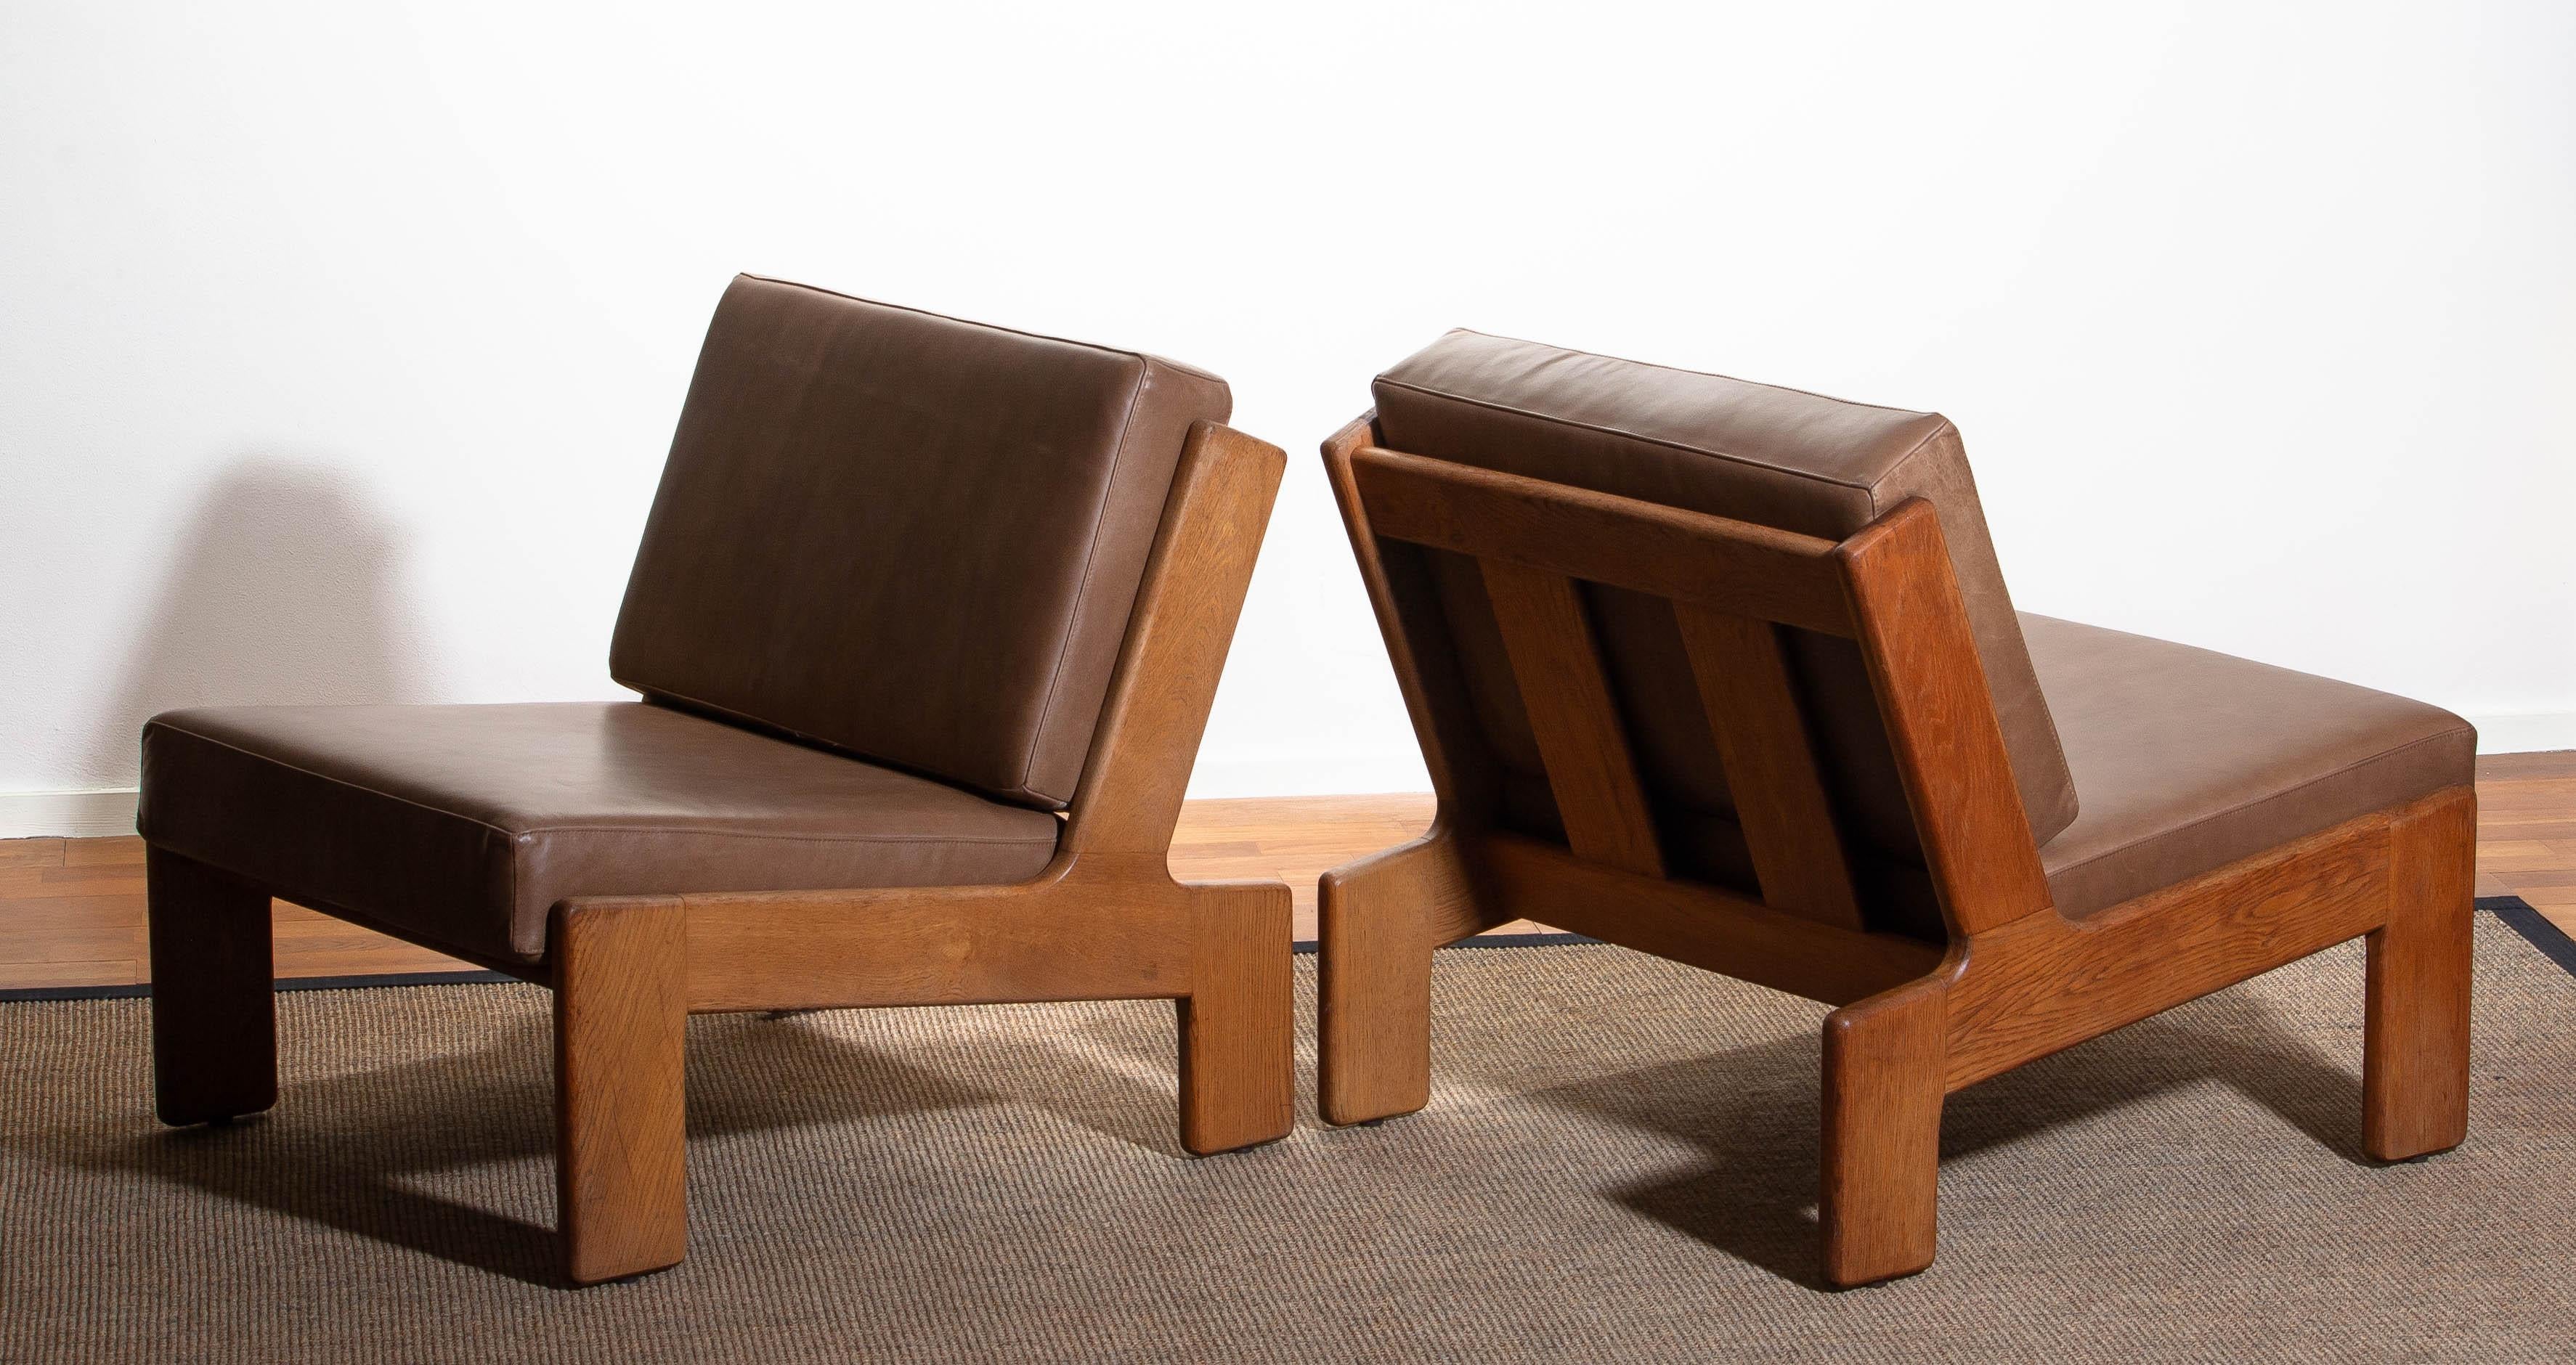 1960s, Pair of Oak and Leather Cubist Lounge Chairs by Esko Pajamies for Asko 2